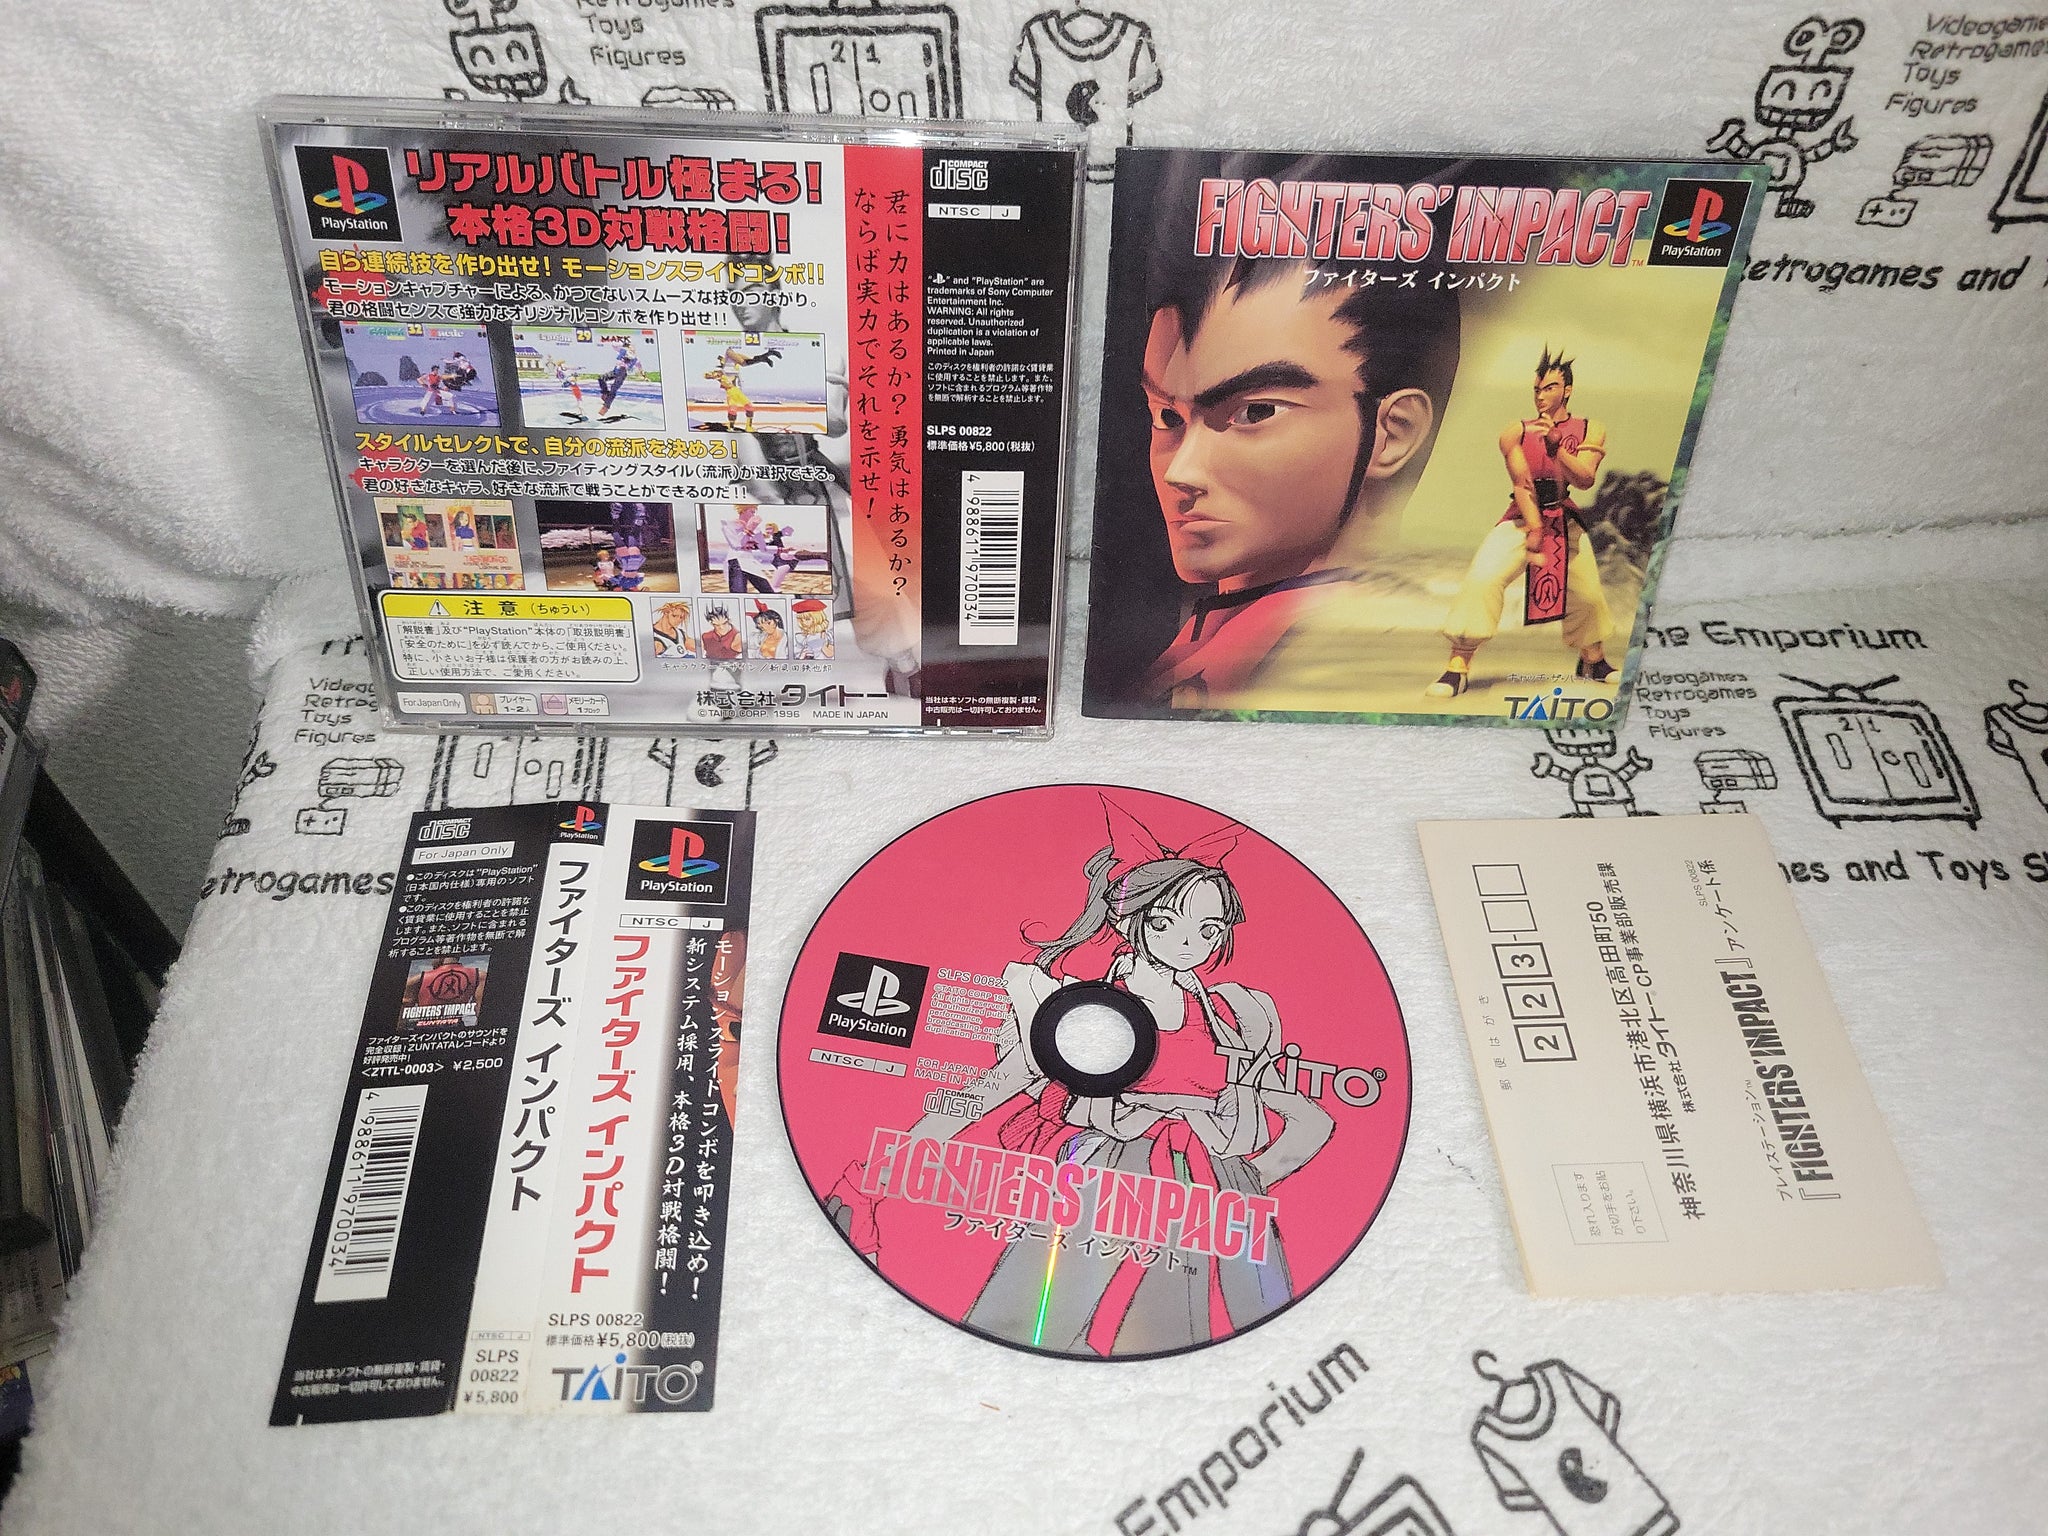 Fighters impact - sony playstation ps1 japan – The Emporium 